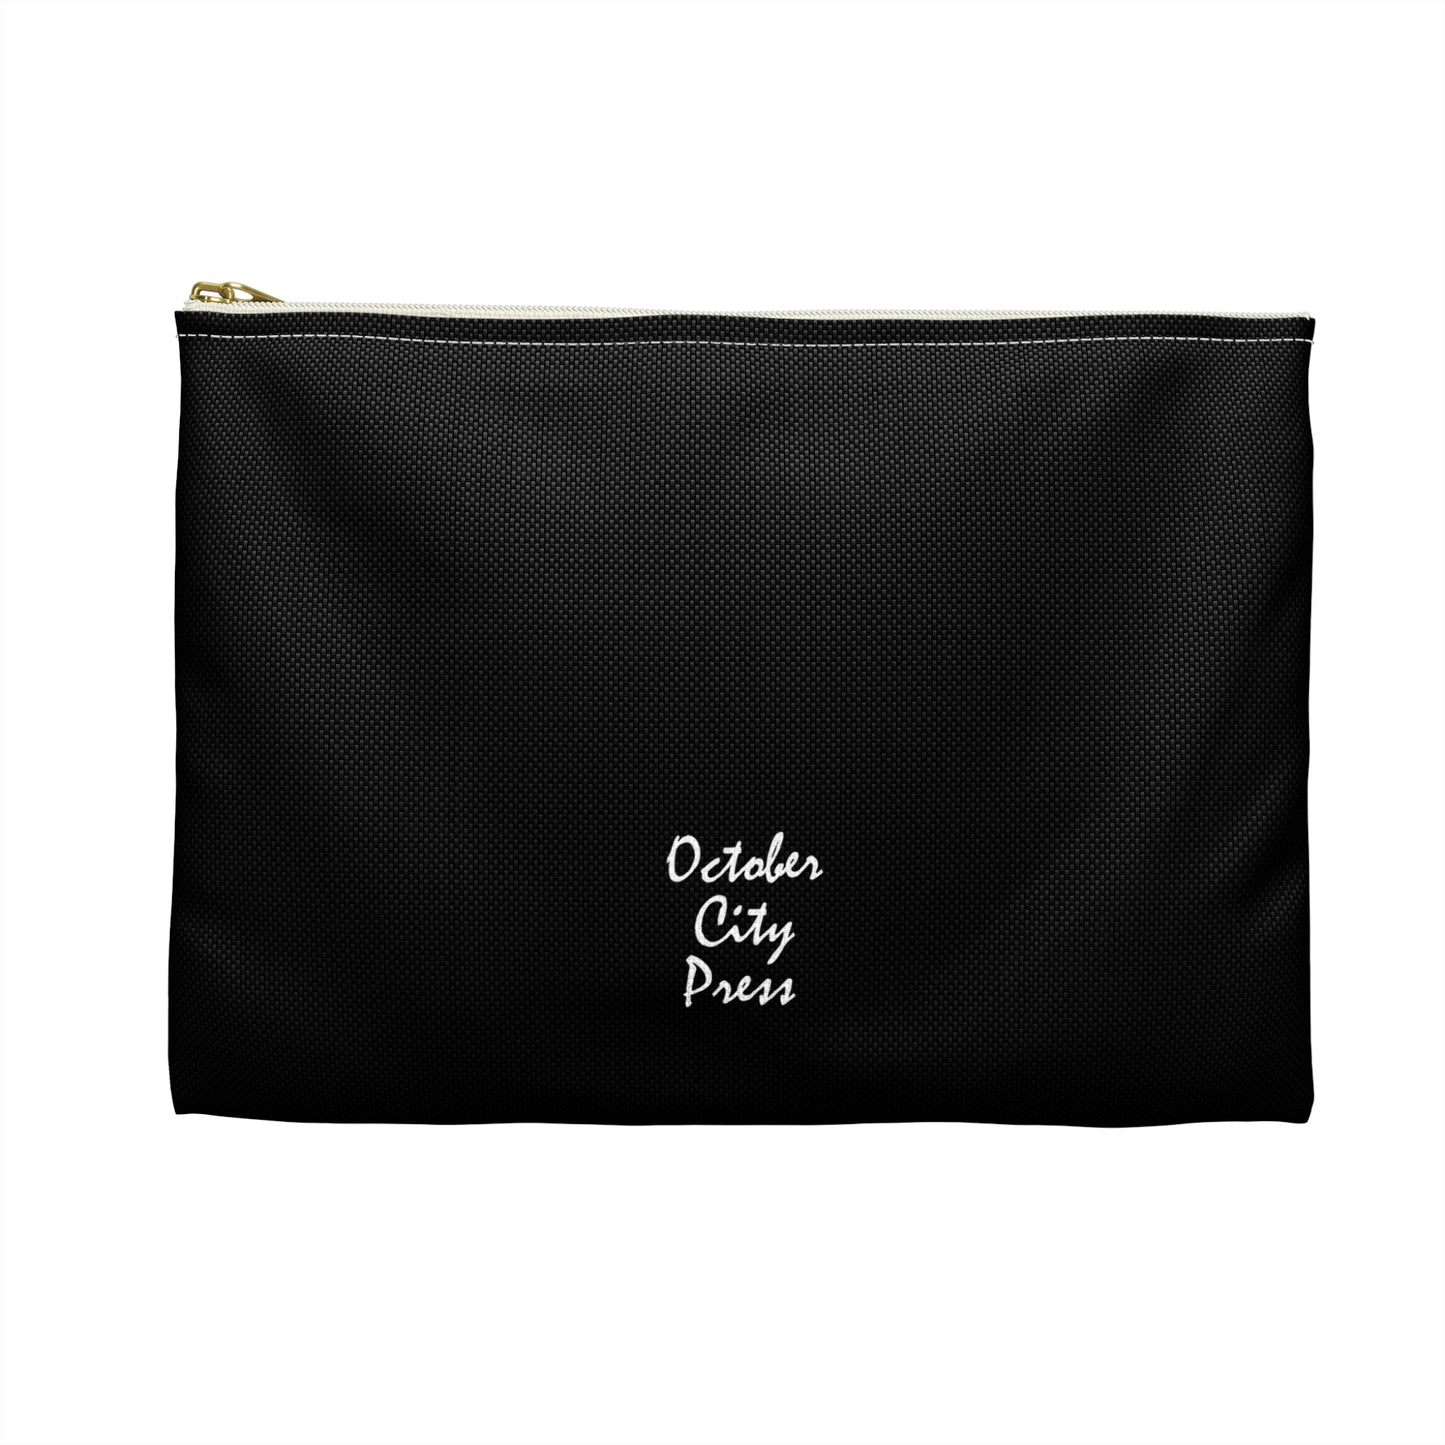 Glass Half Full Goth Cosmetic Pouch